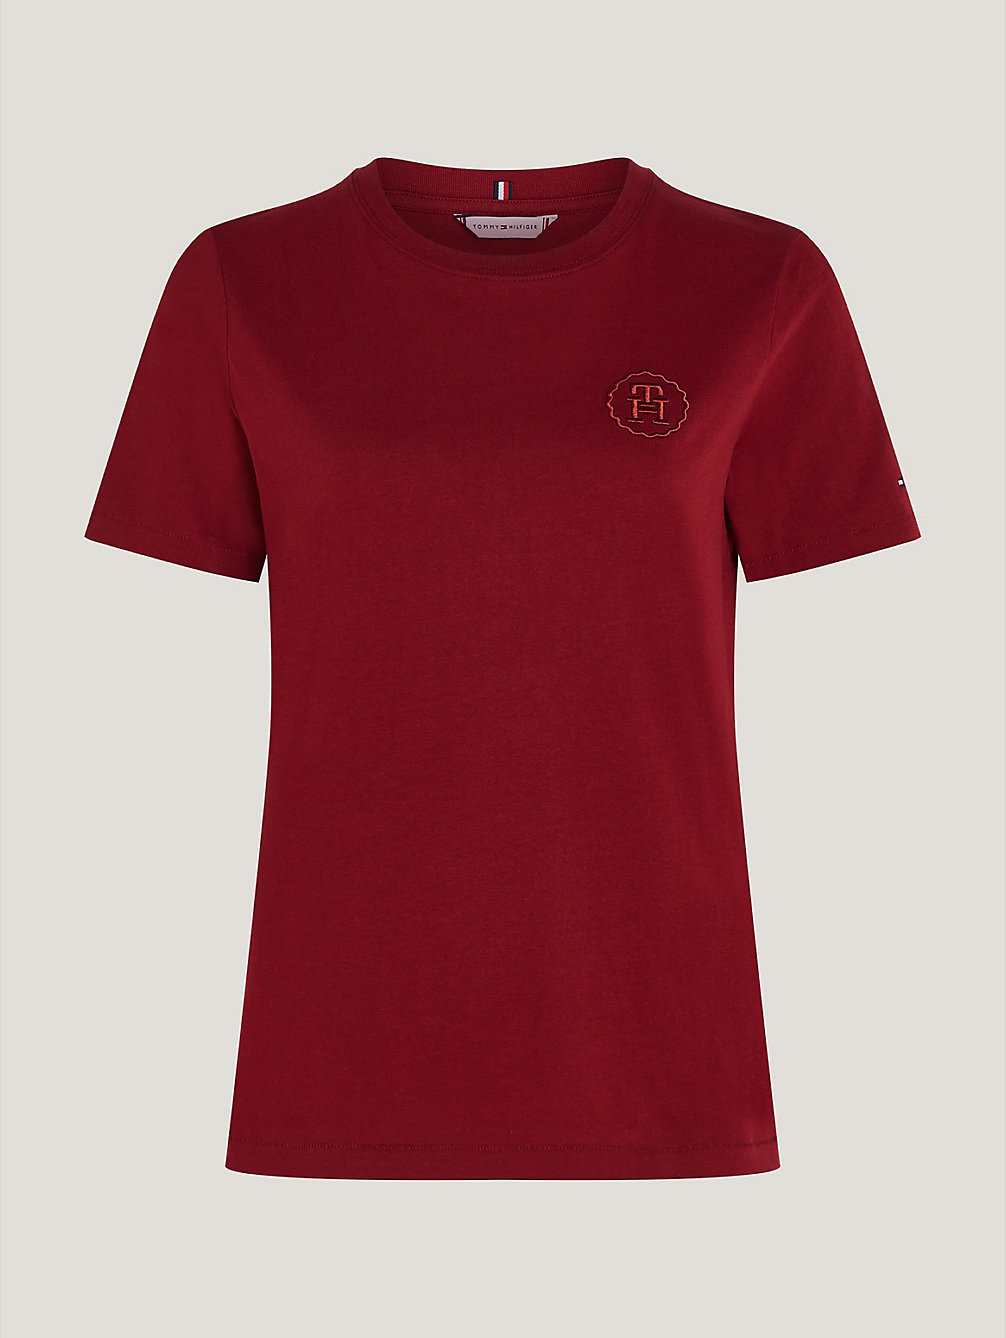 red modern tonal logo embroidery t-shirt for women tommy hilfiger